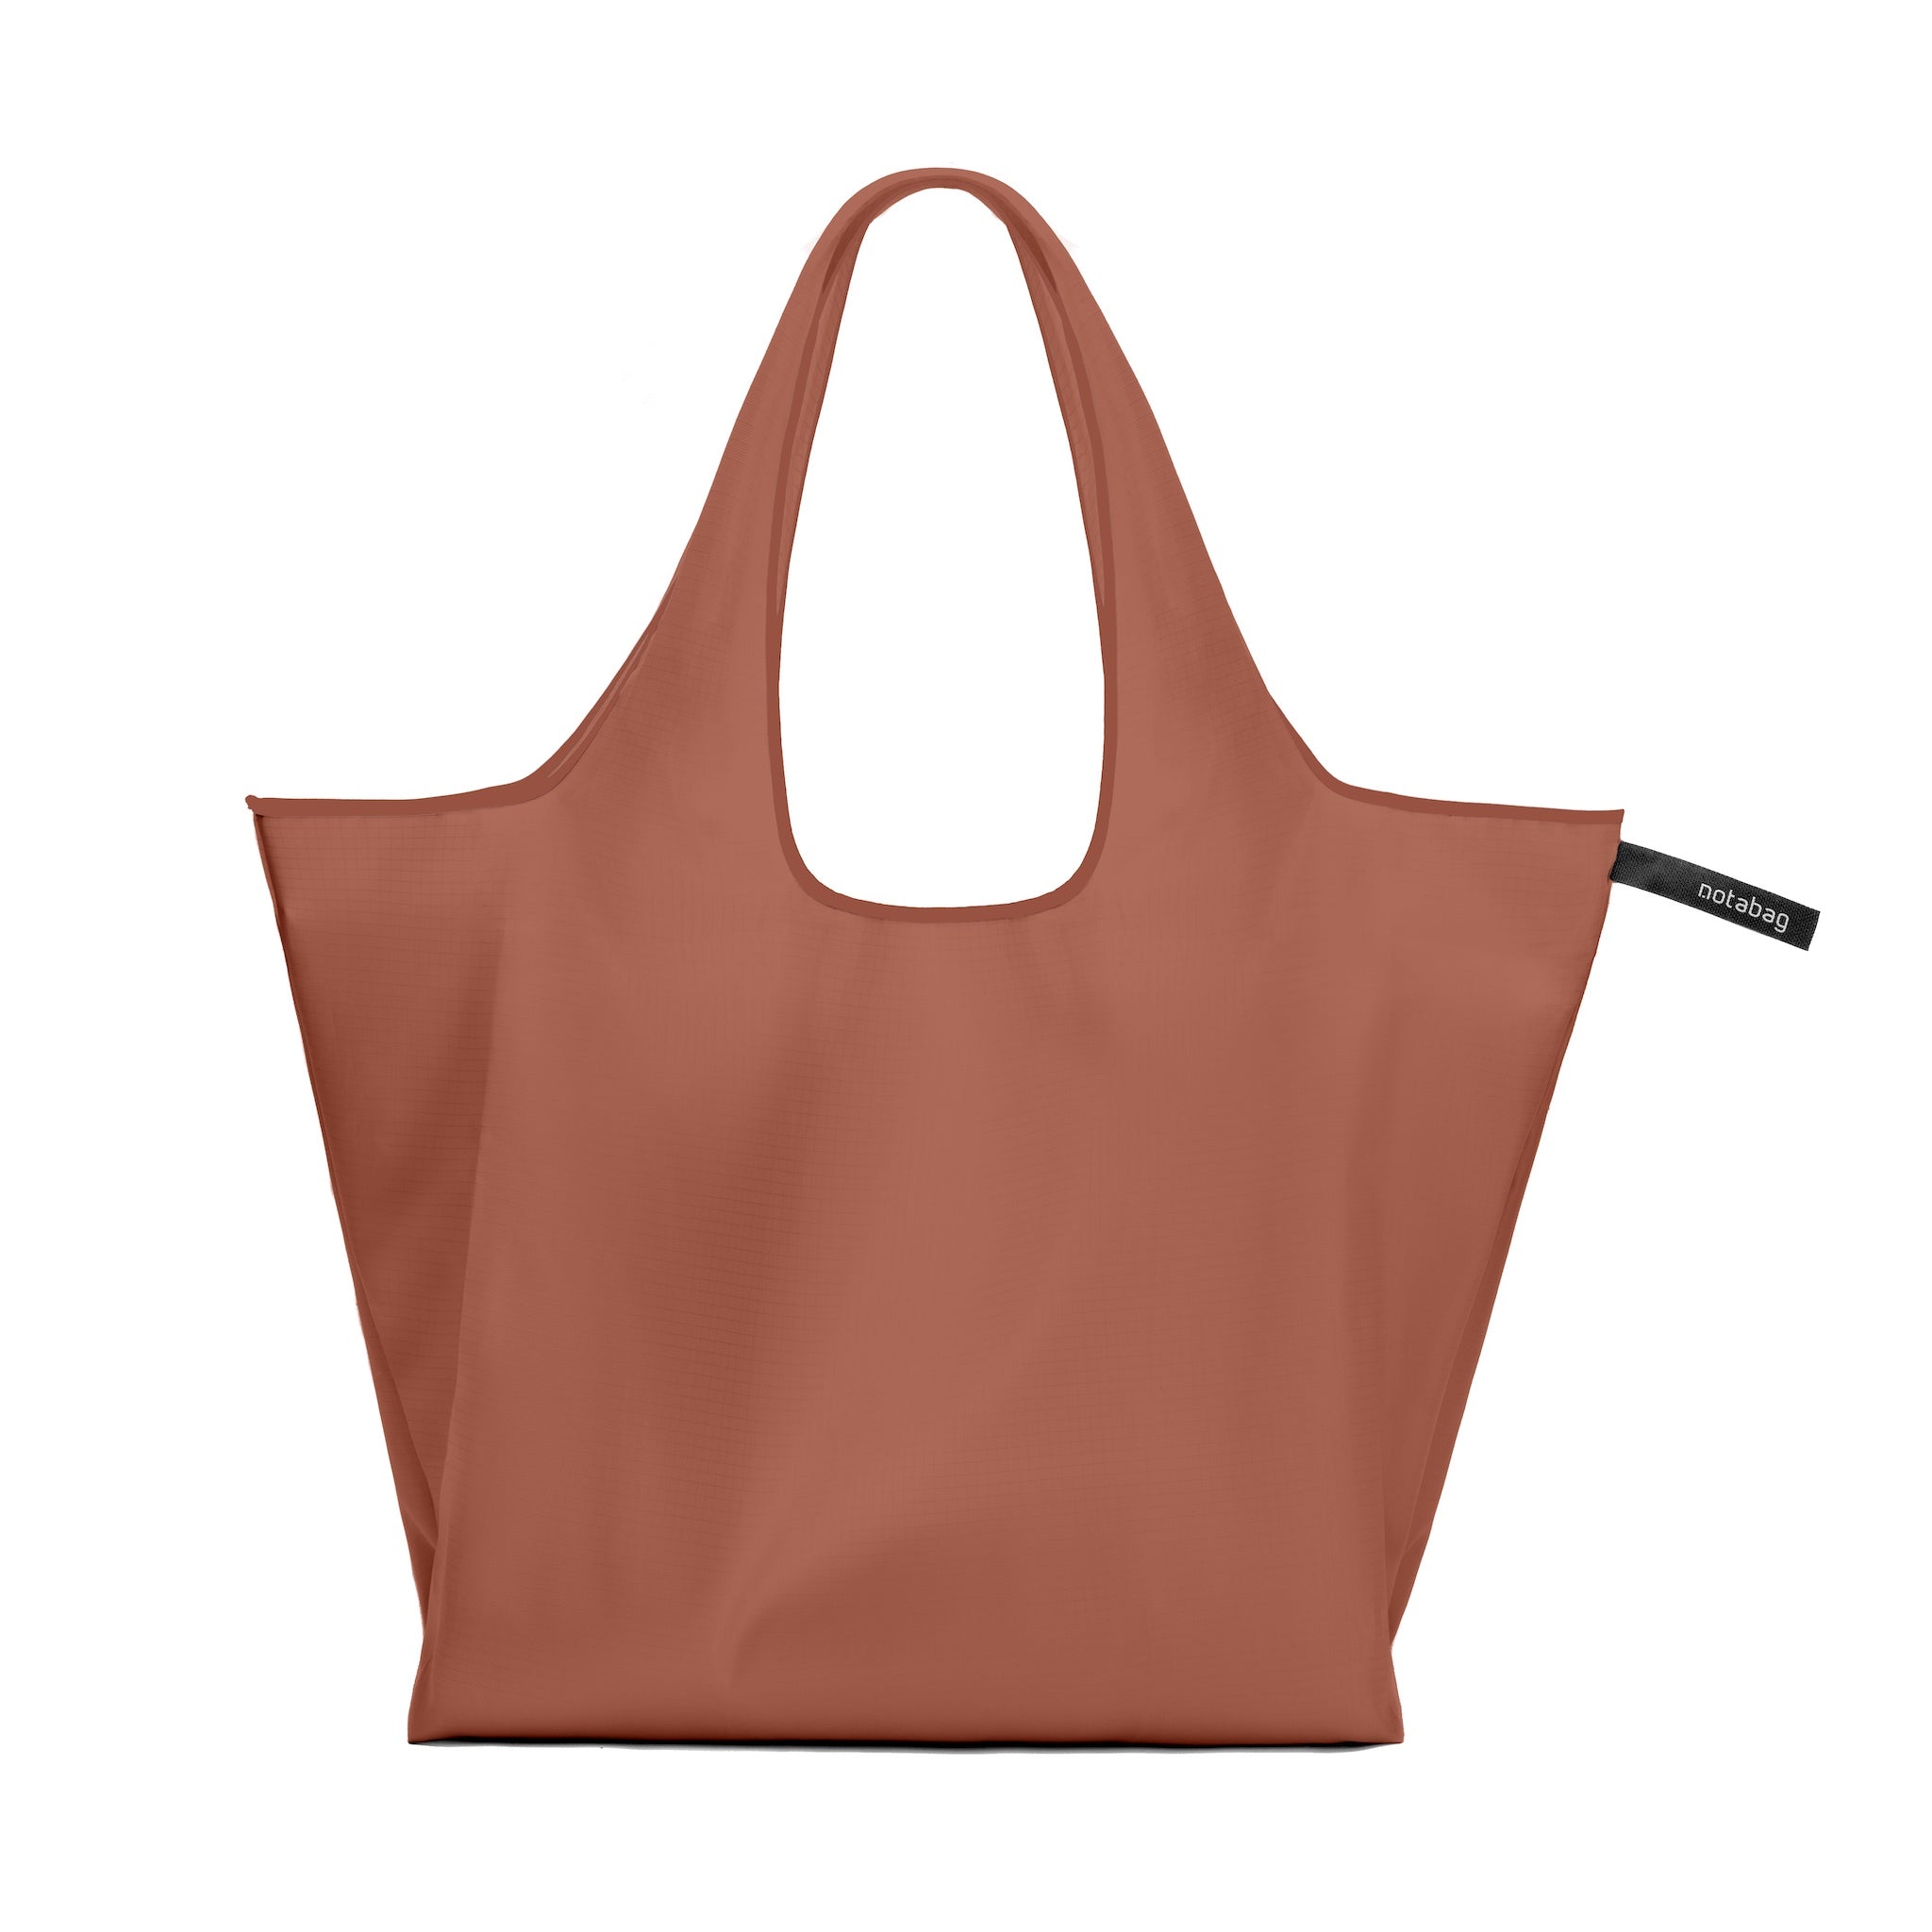 Terracotta Foldable Recycled Tote Bag